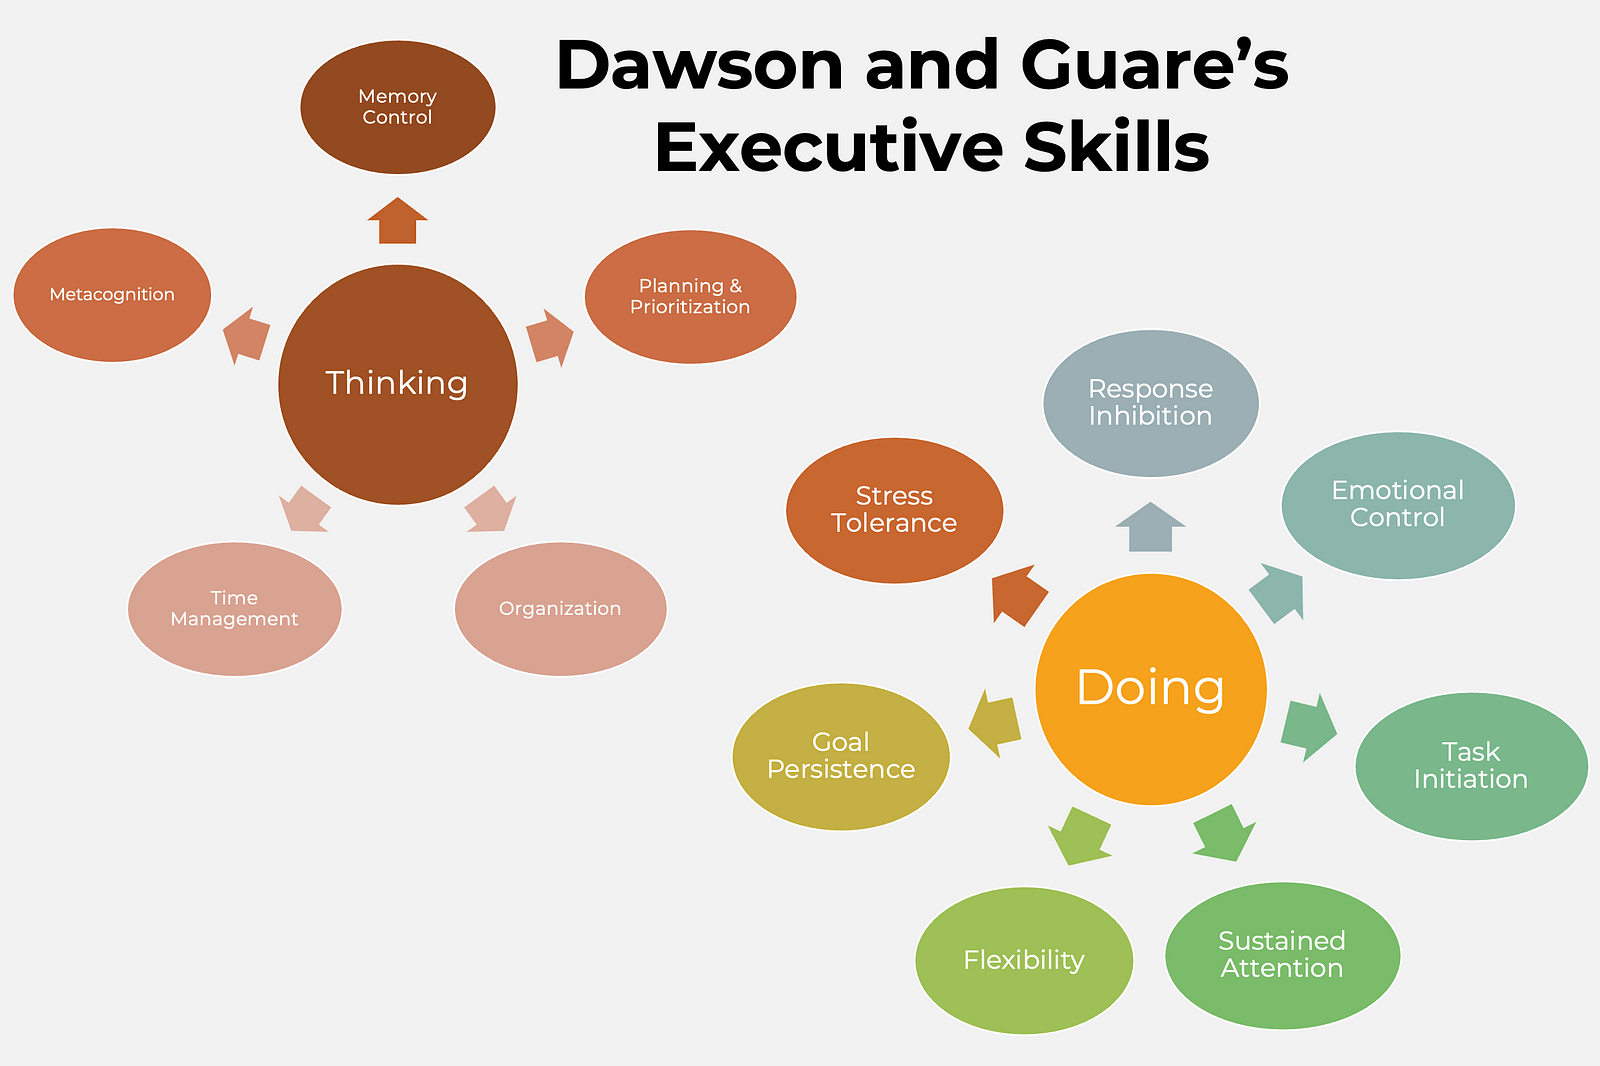 An infographic of Dawson and Guare’s Executive Skills, which are also listed in the text below.